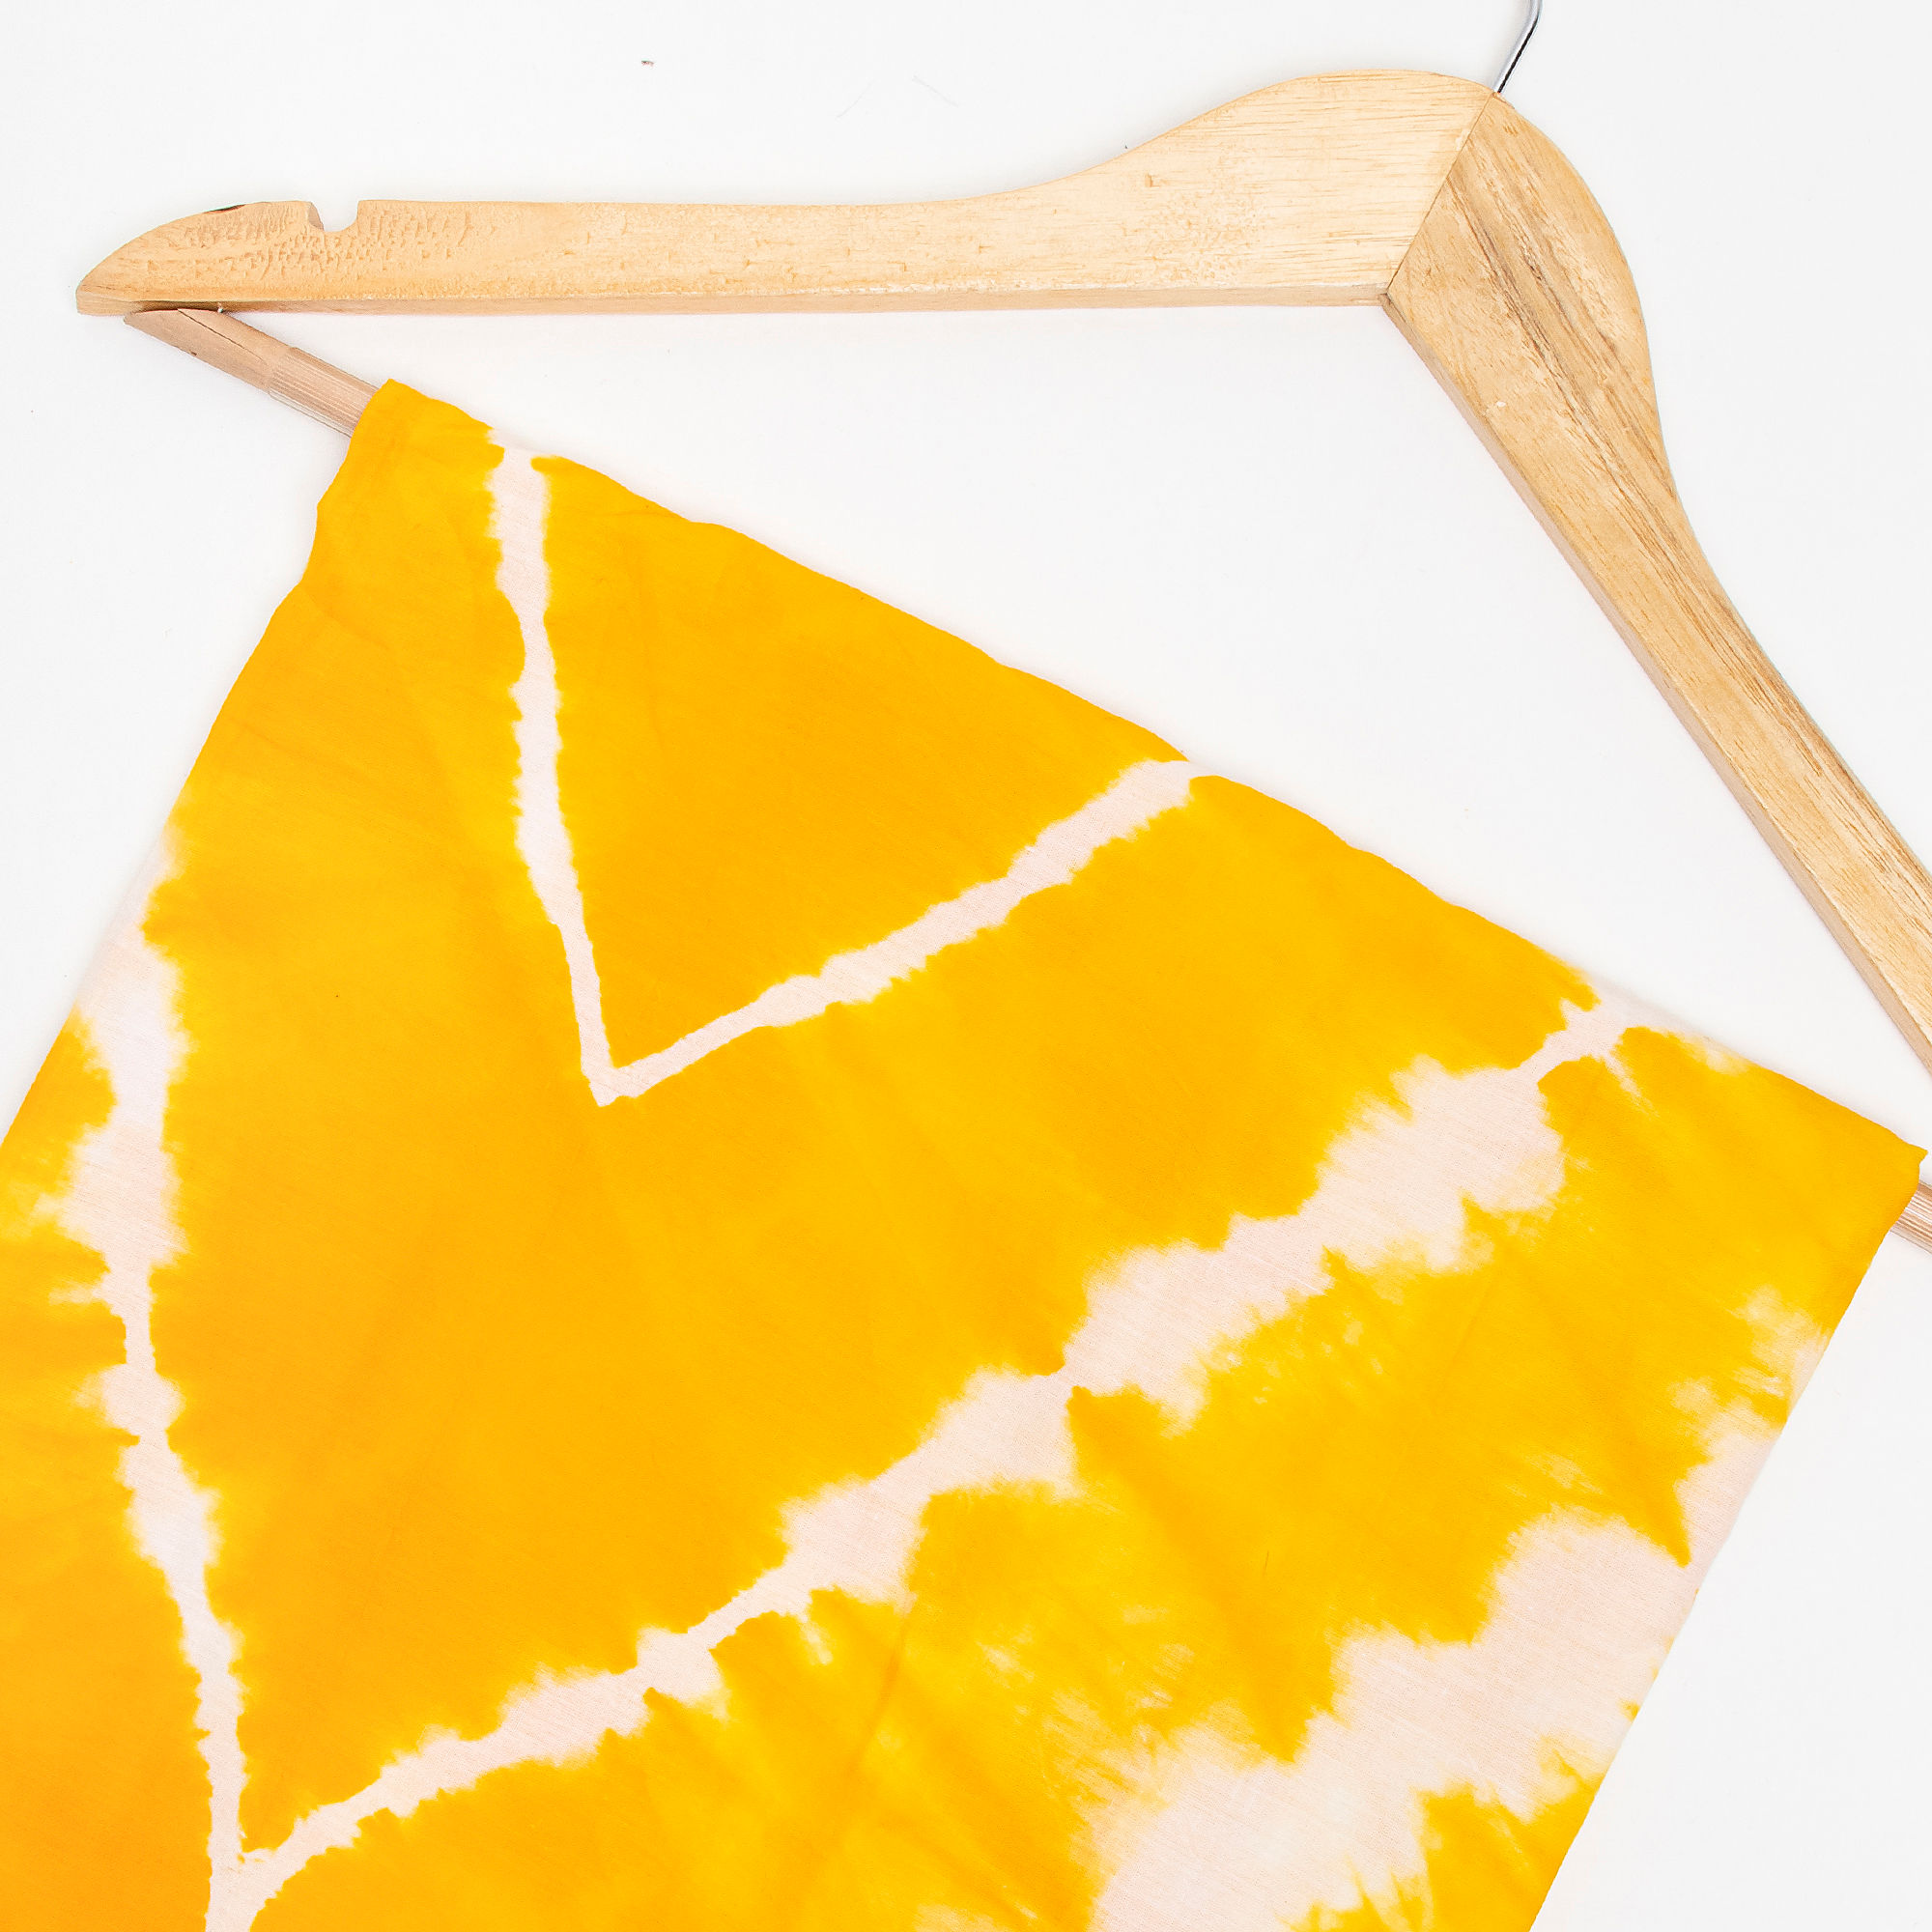 TIE AND DYE COTTON FABRIC IN WHITE AND DARK YELLOW